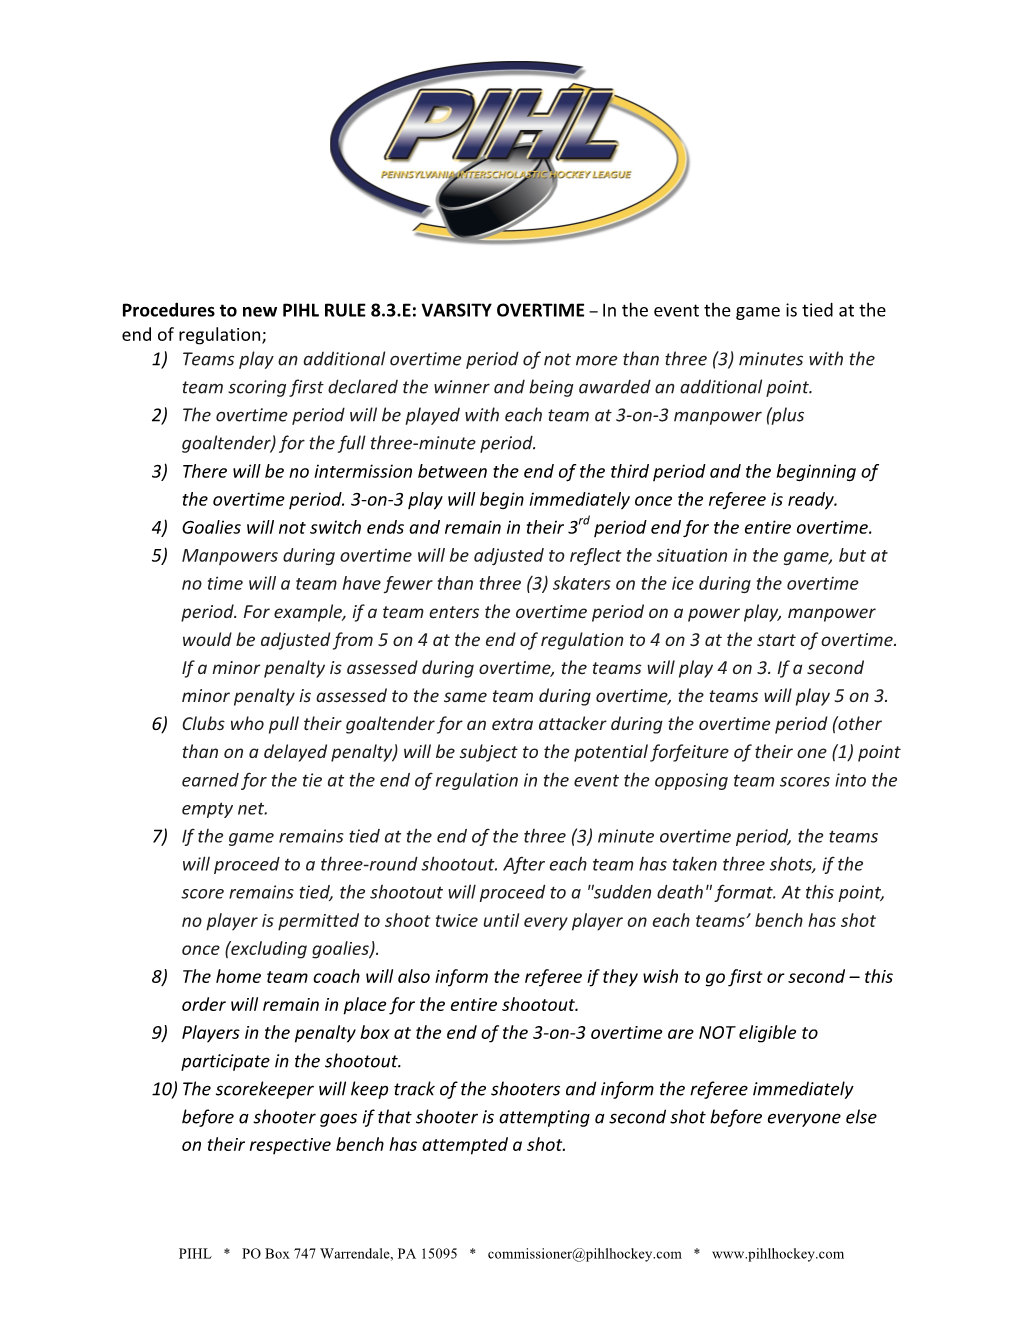 Procedures to New PIHL RULE 8.3.E: VARSITY OVERTIME – in the Event